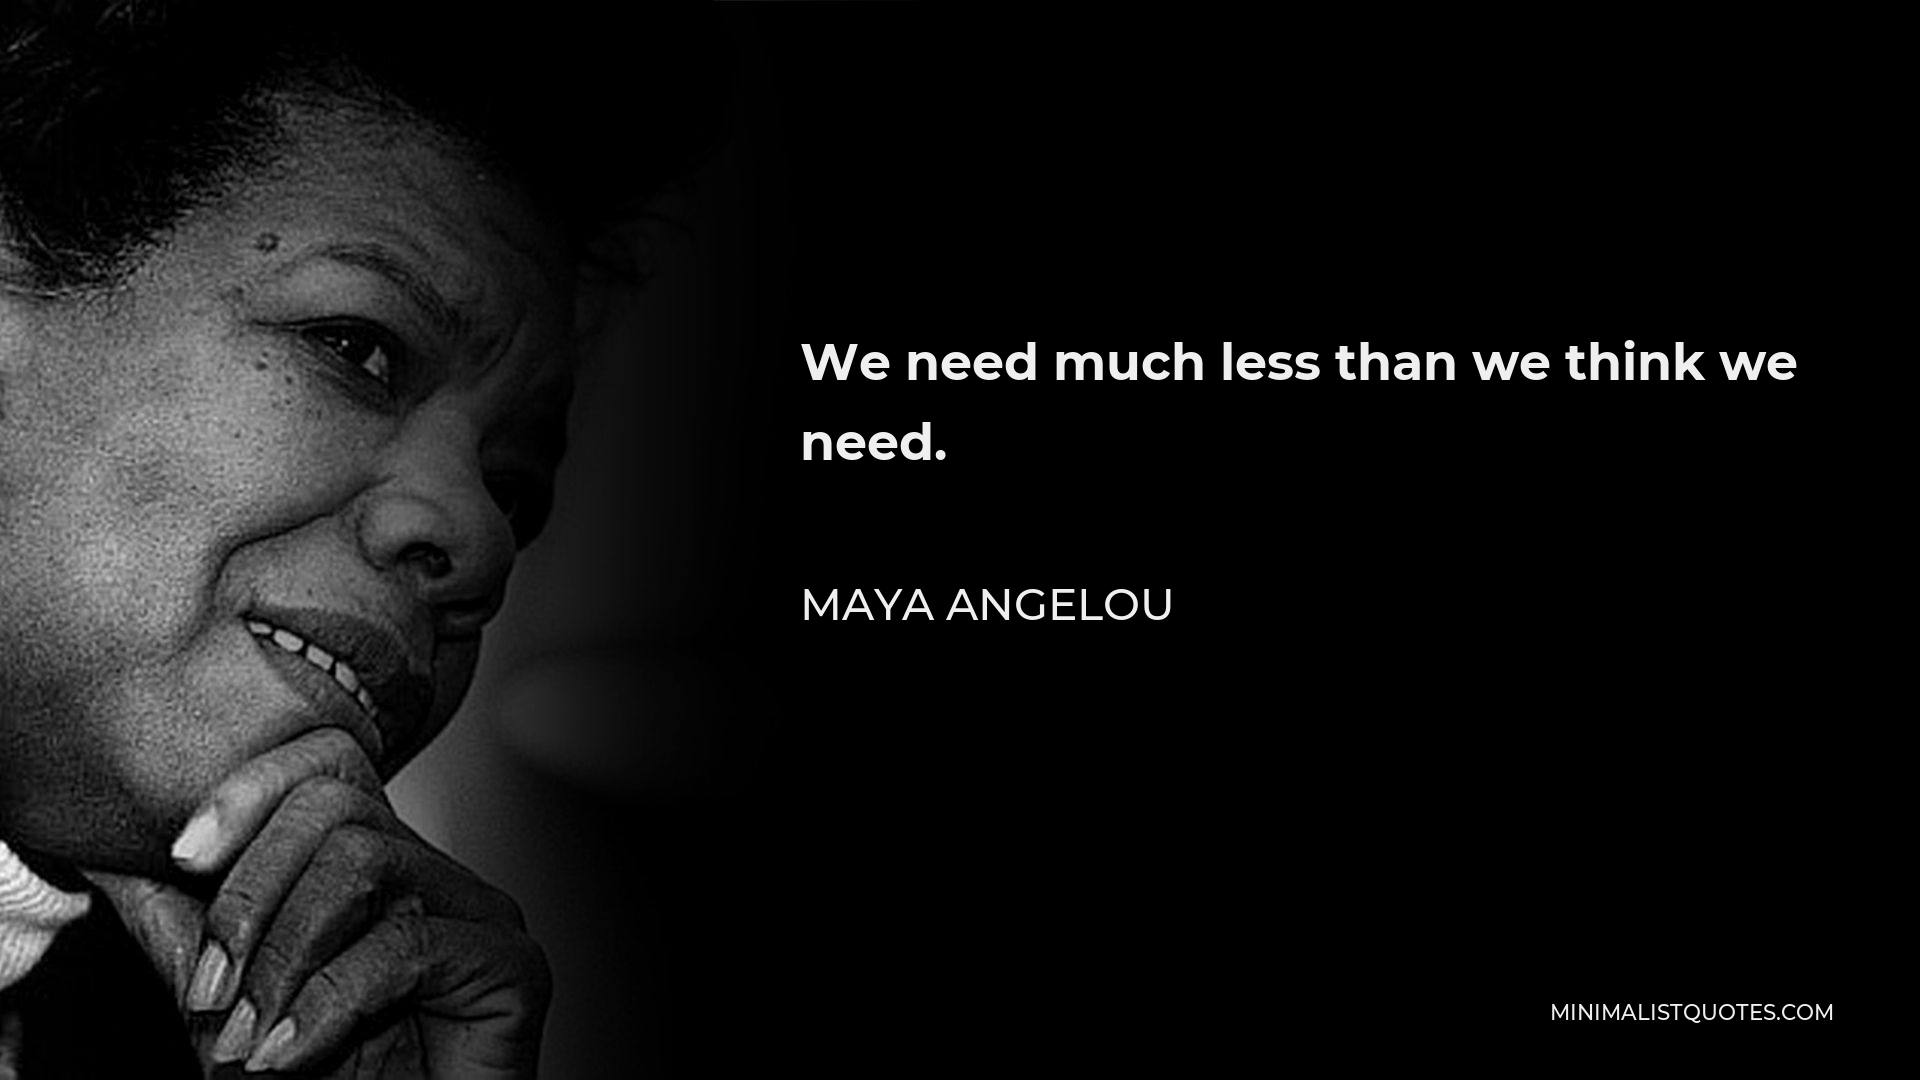 Maya Angelou Quote - We need much less than we think we need.